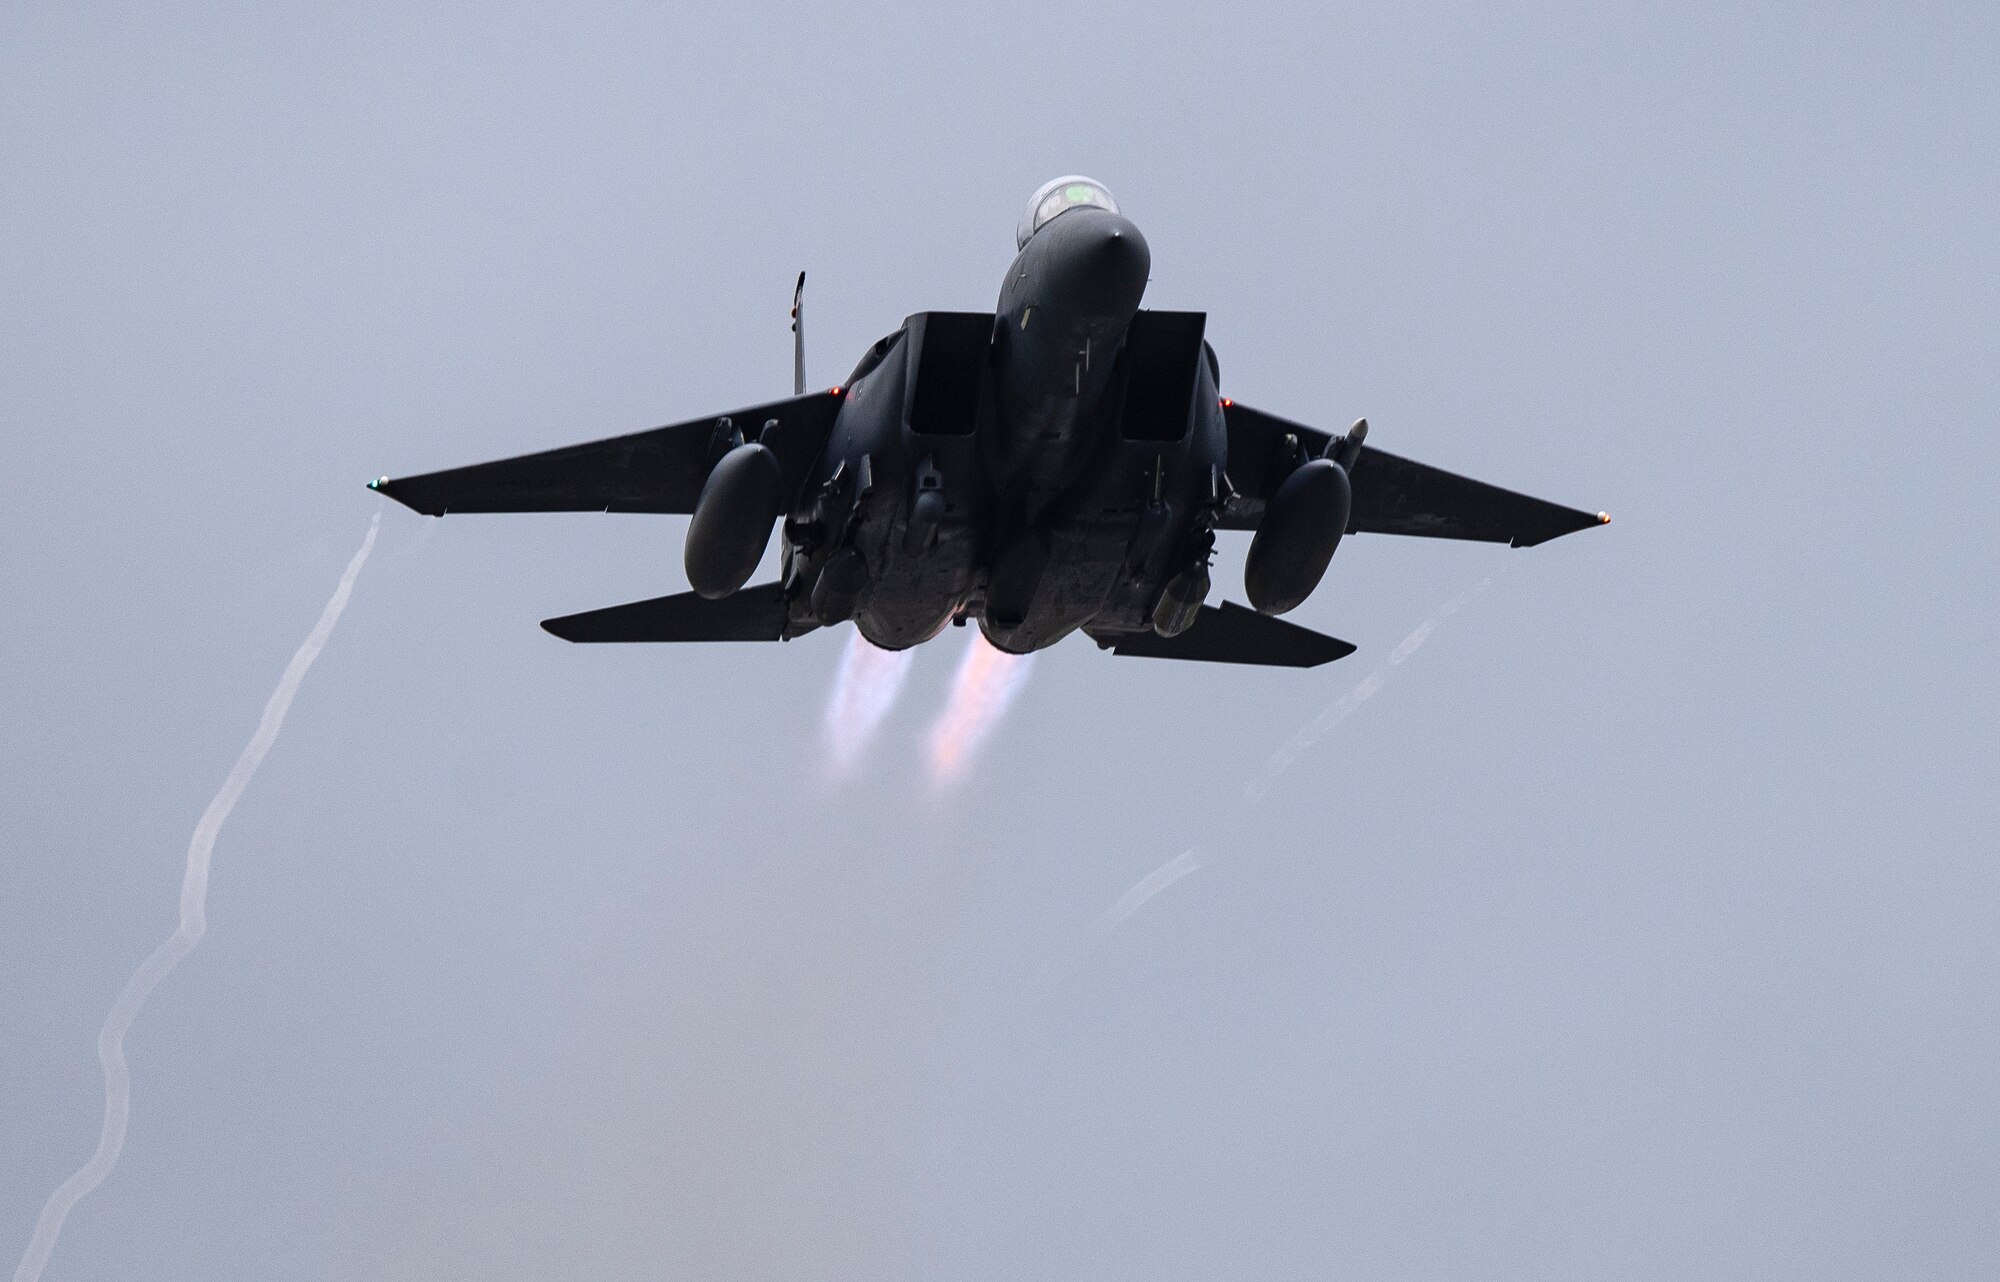 An F-15E Strike Eagle assigned to the 494th Fighter Squadron takes off from Royal Air Force Lakenheath, England, to Aalborg Air Base, Denmark, Oct. 30, 2020. Agile combat employment within the Baltic airspace and surrounding nations is key to regional defense and stability. Collective training events enhance the ability of NATO forces to work together effectively to fight from varying locations and respond to any threats. (U.S. Air Force photo by Airman 1st Class Jessi Monte)